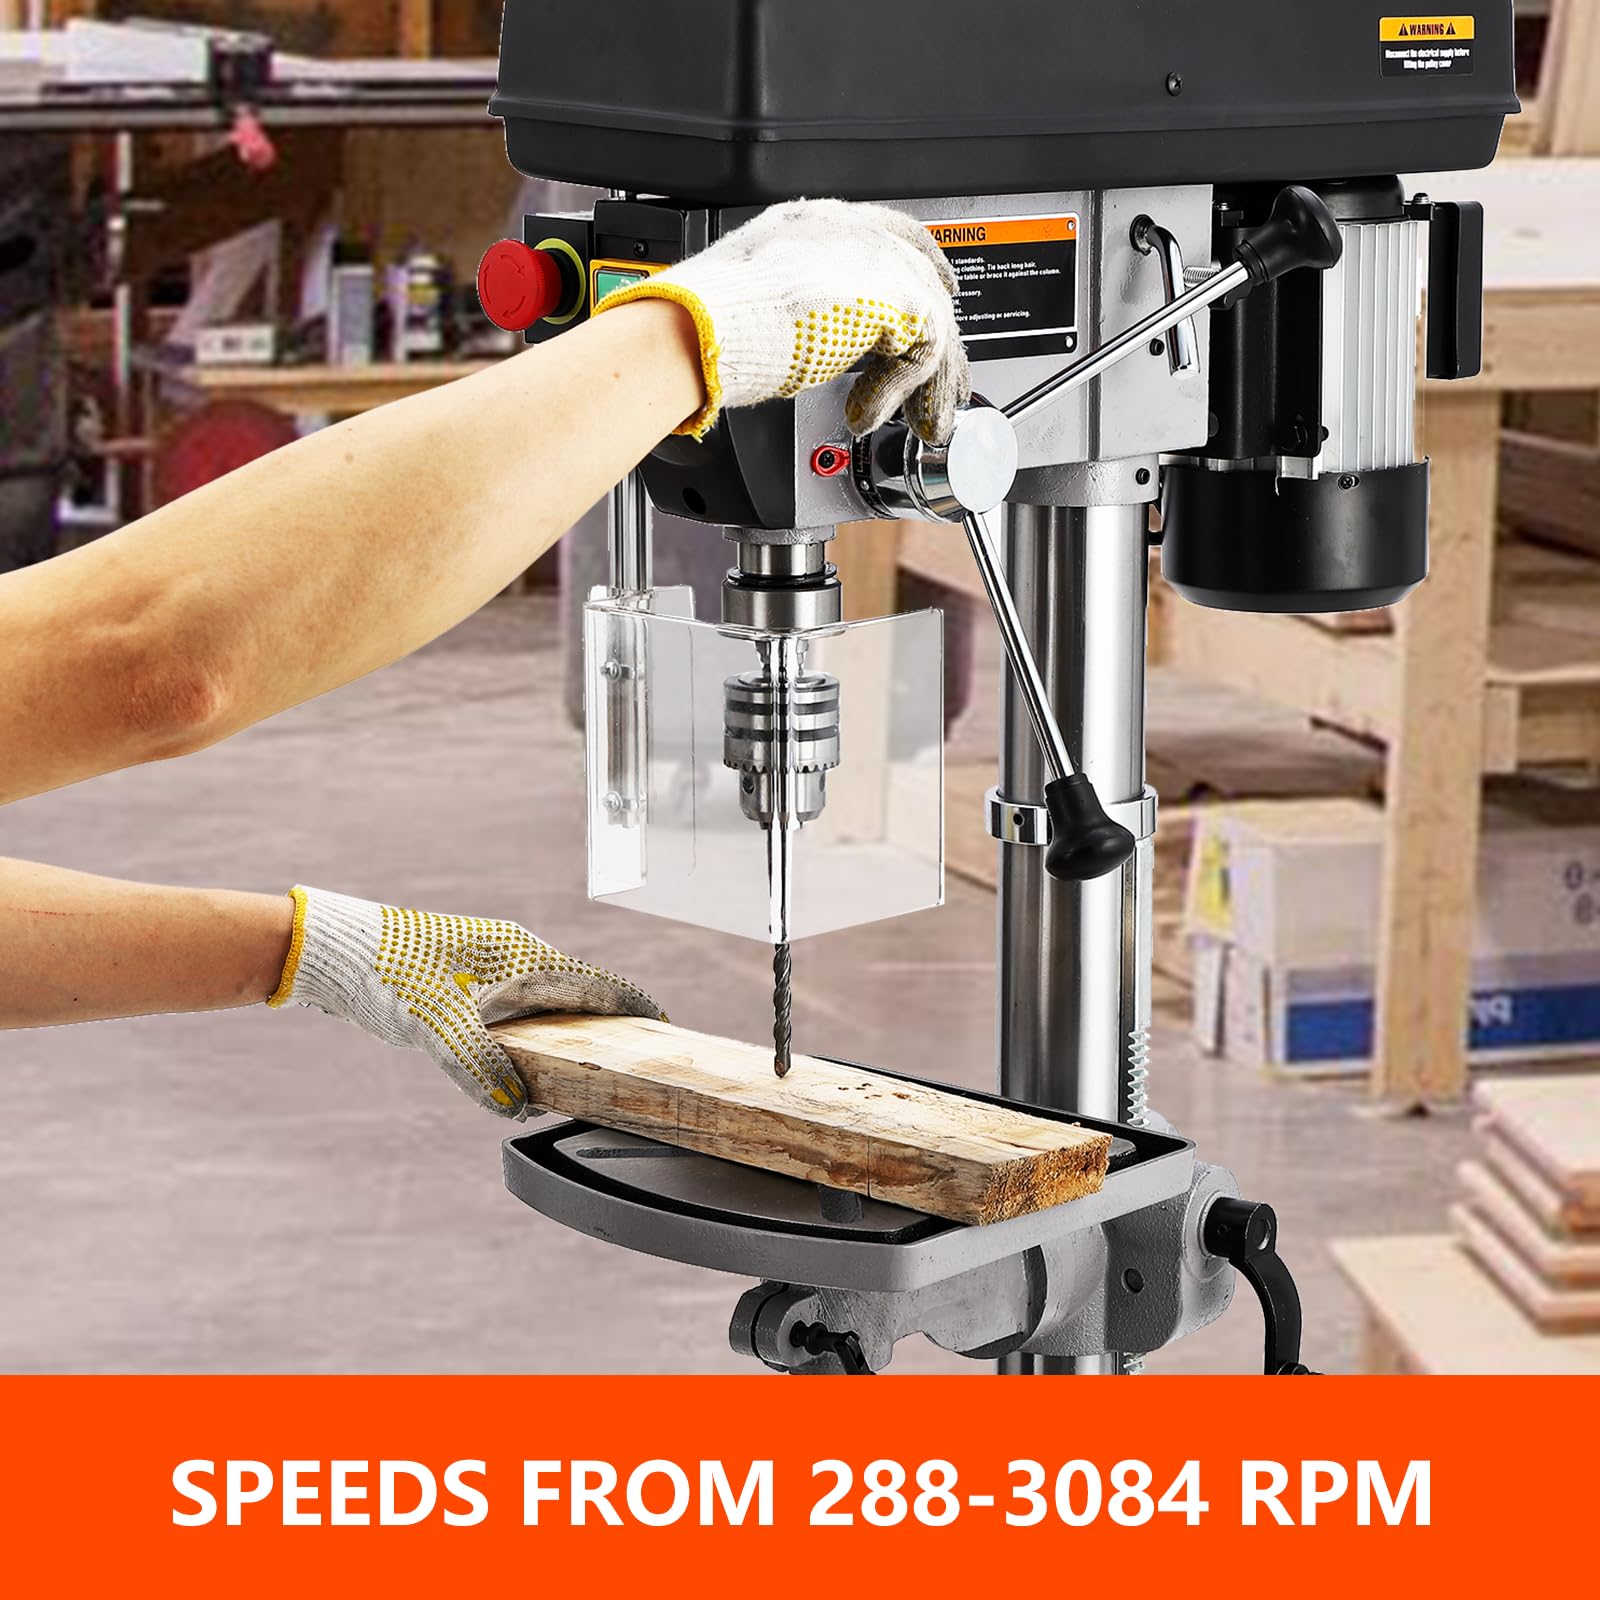 15 Inch Floor Drill Press, 7.5 Amp 120V with Safety Guard